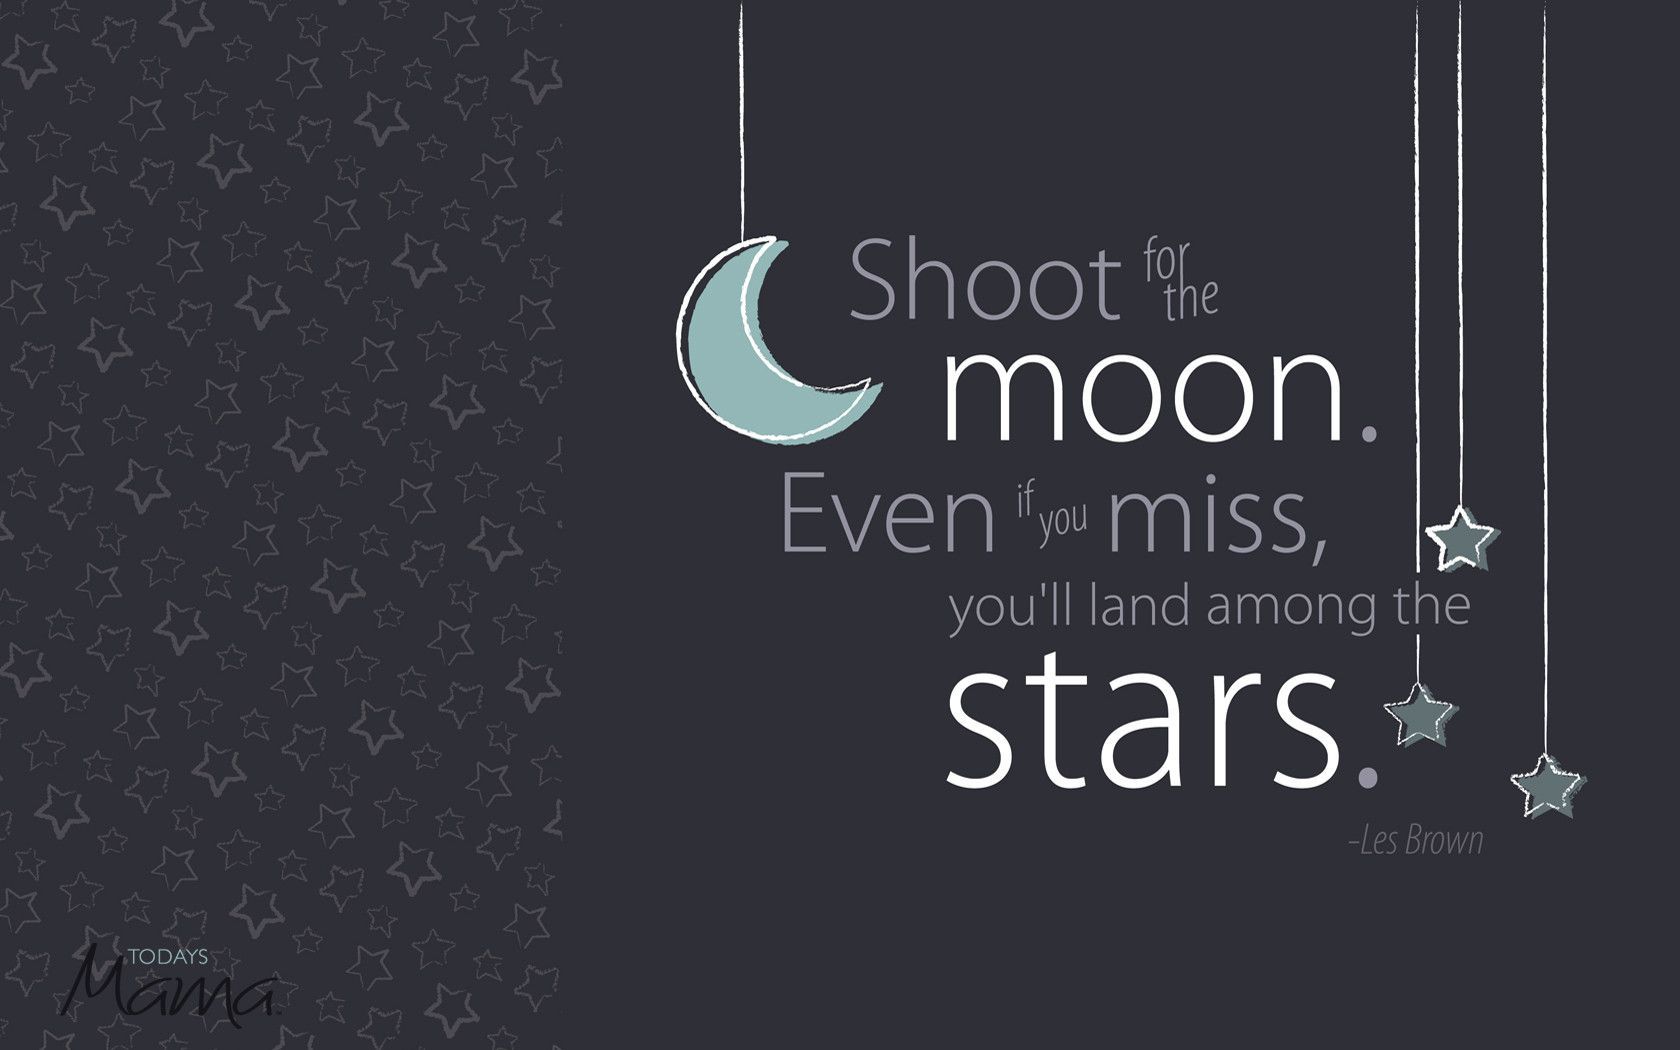 Shoot for the moon